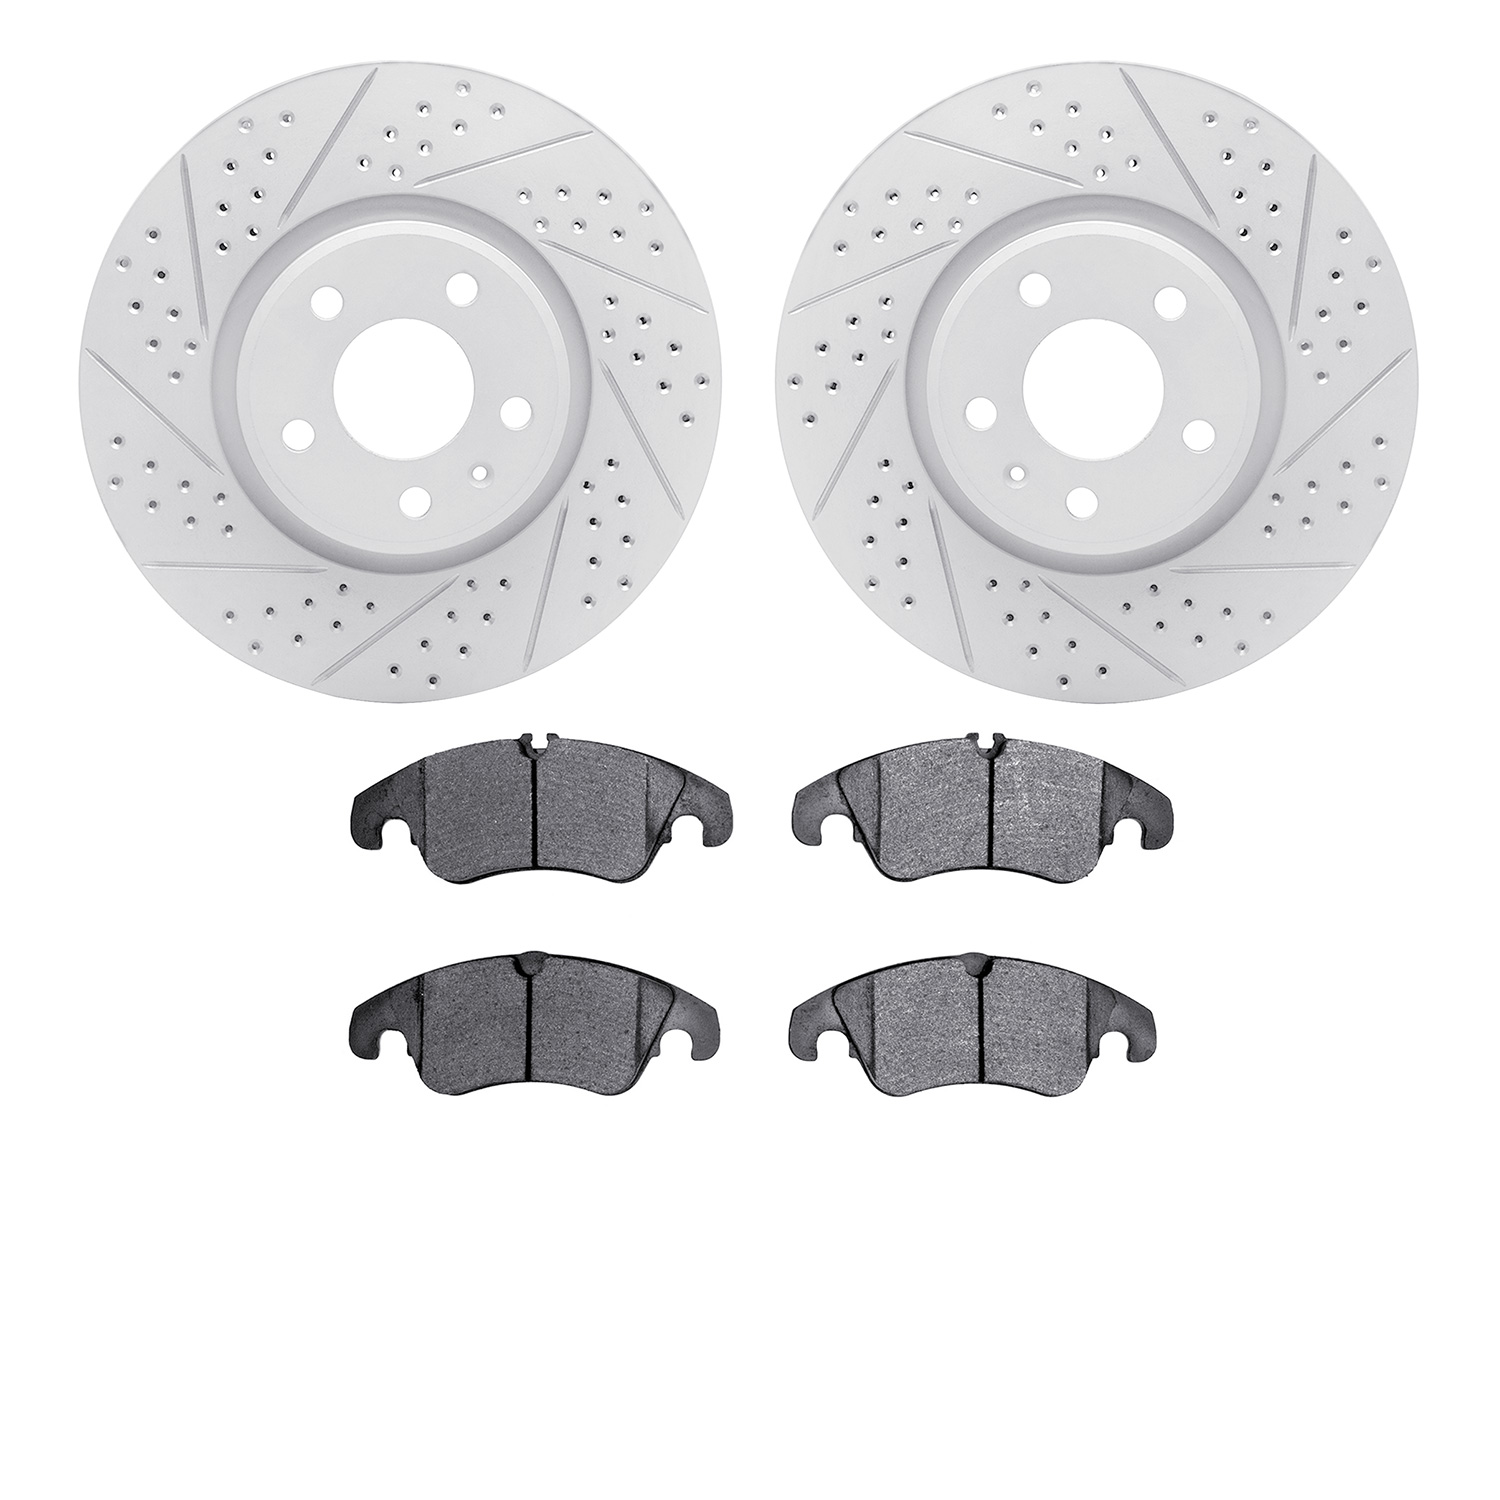 2502-73064 Geoperformance Drilled/Slotted Rotors w/5000 Advanced Brake Pads Kit, 2012-2016 Audi/Volkswagen, Position: Front